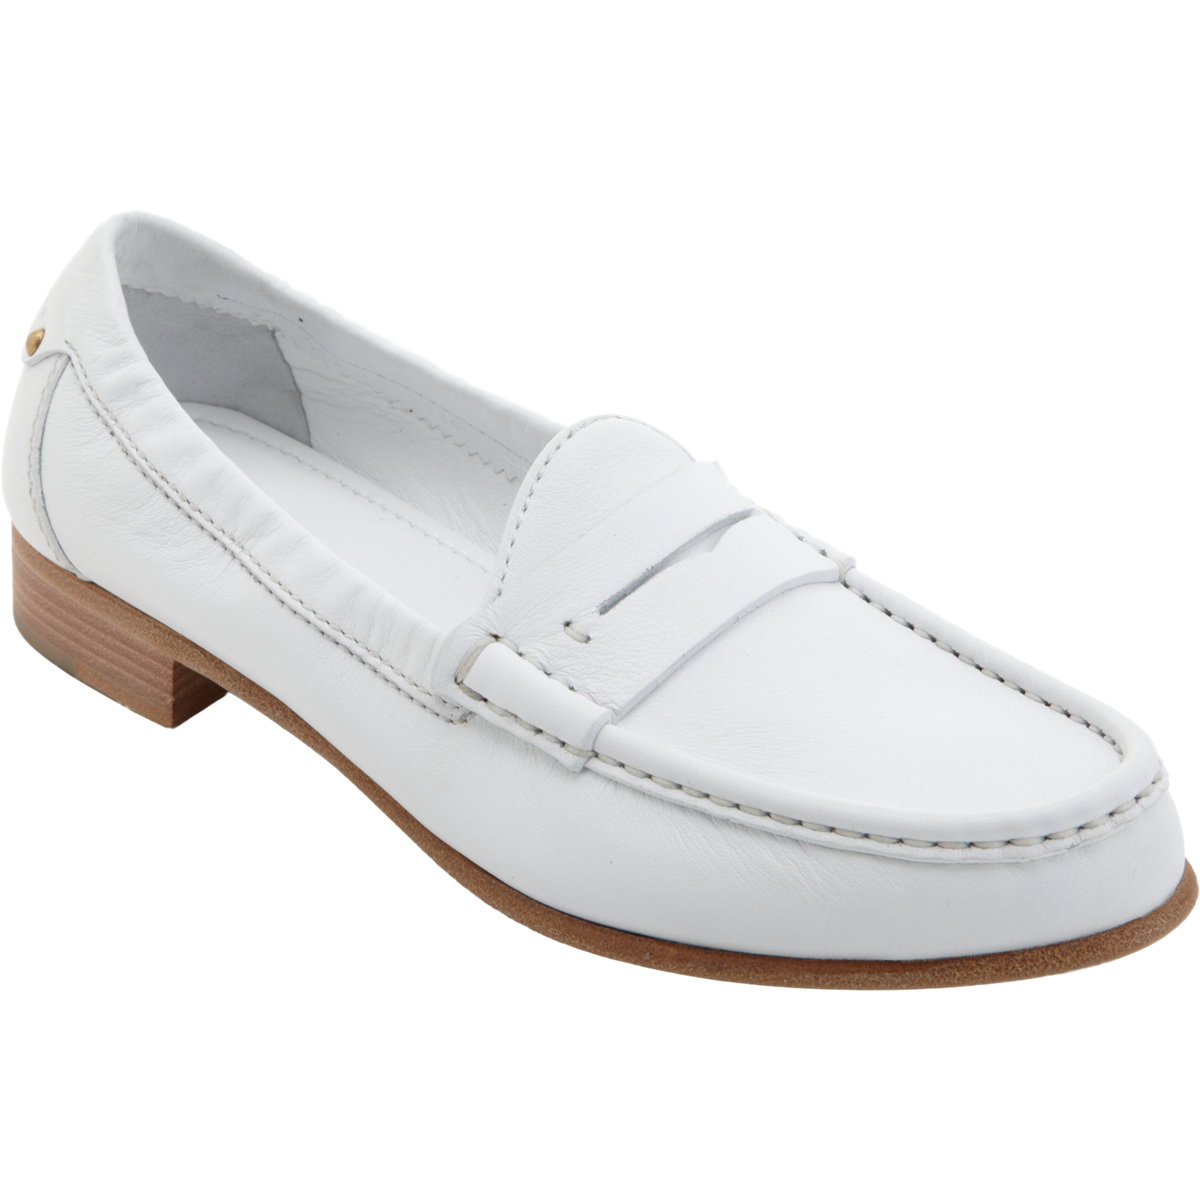 Sergio Rossi Penny Loafer in White | Lyst